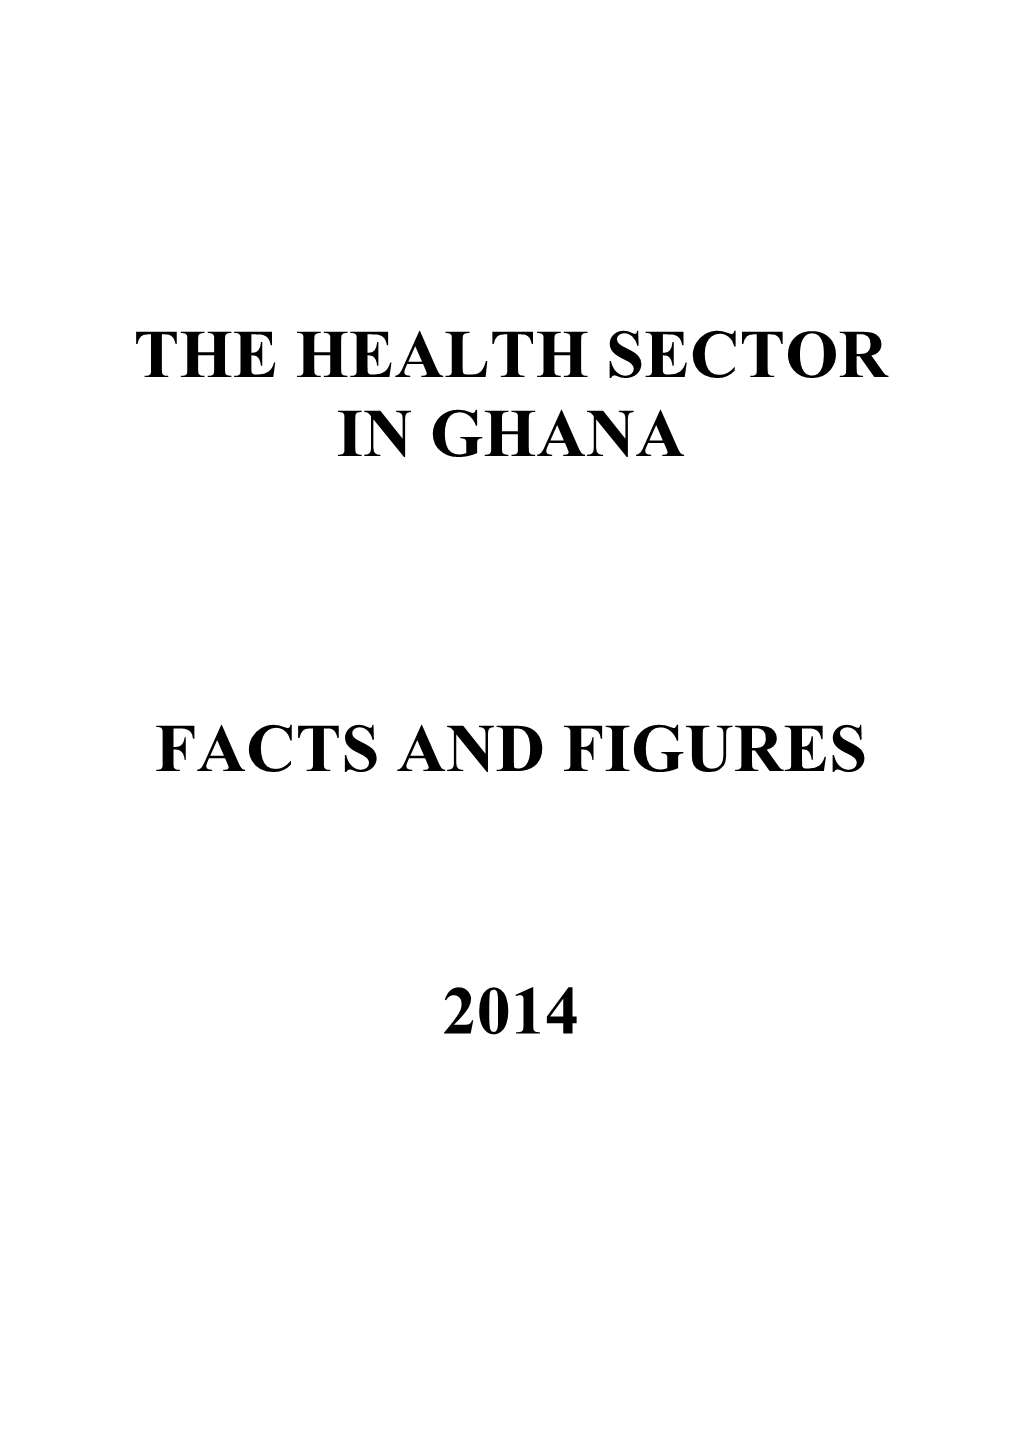 The Health Sector in Ghana Facts and Figures 2014